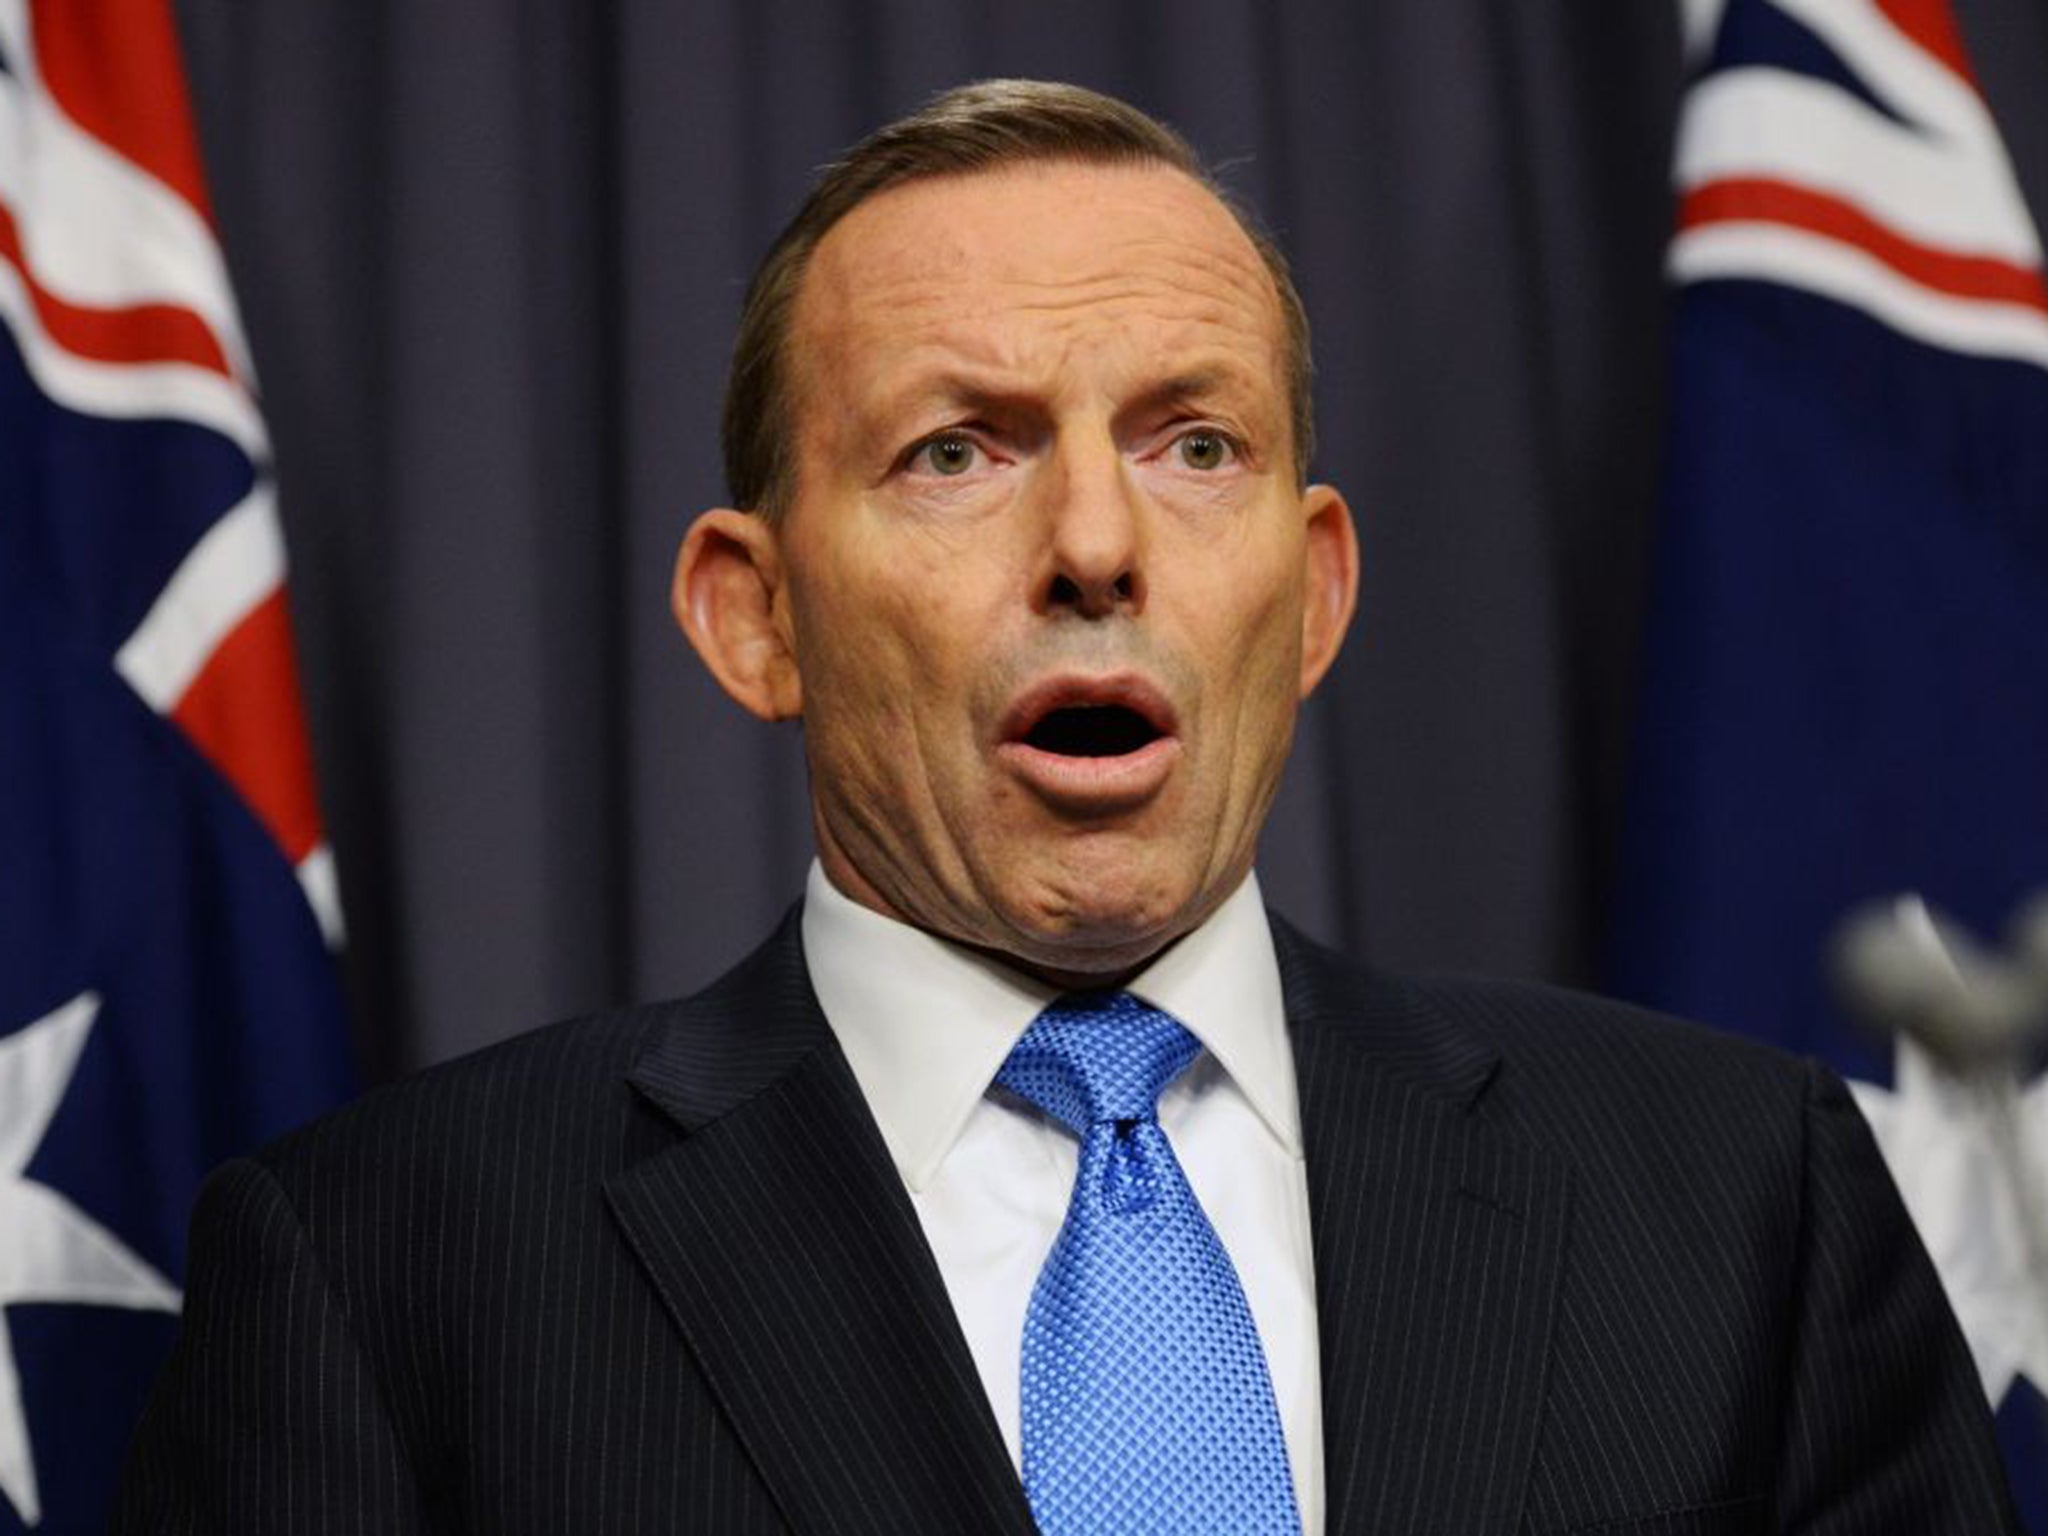 Tony Abbott at his departing press conference as prime minister in 2015